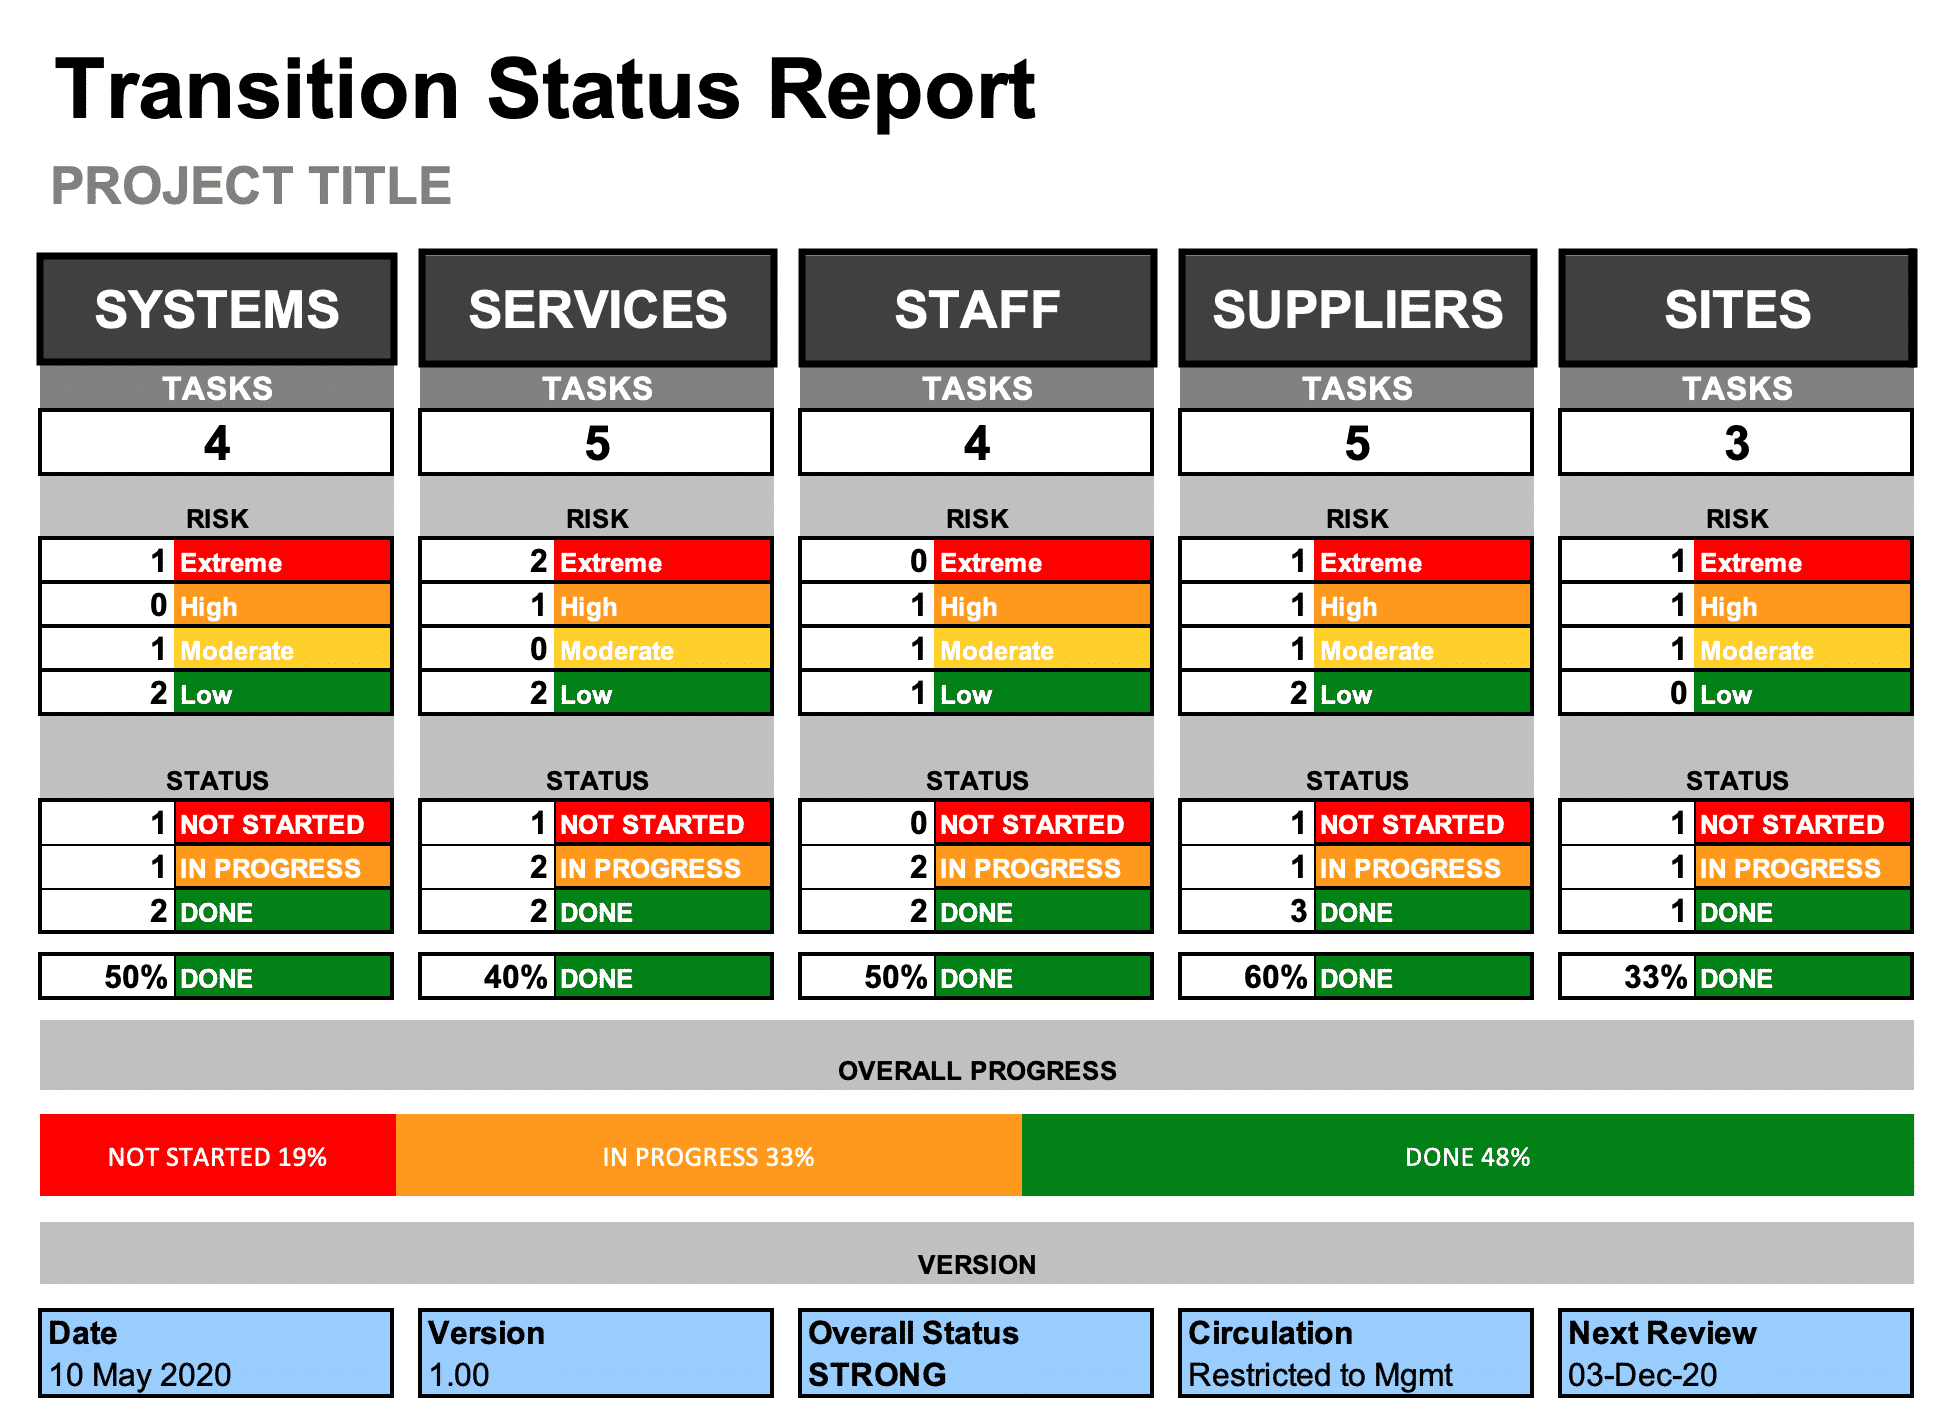 Transition Status Report Template (Excel)